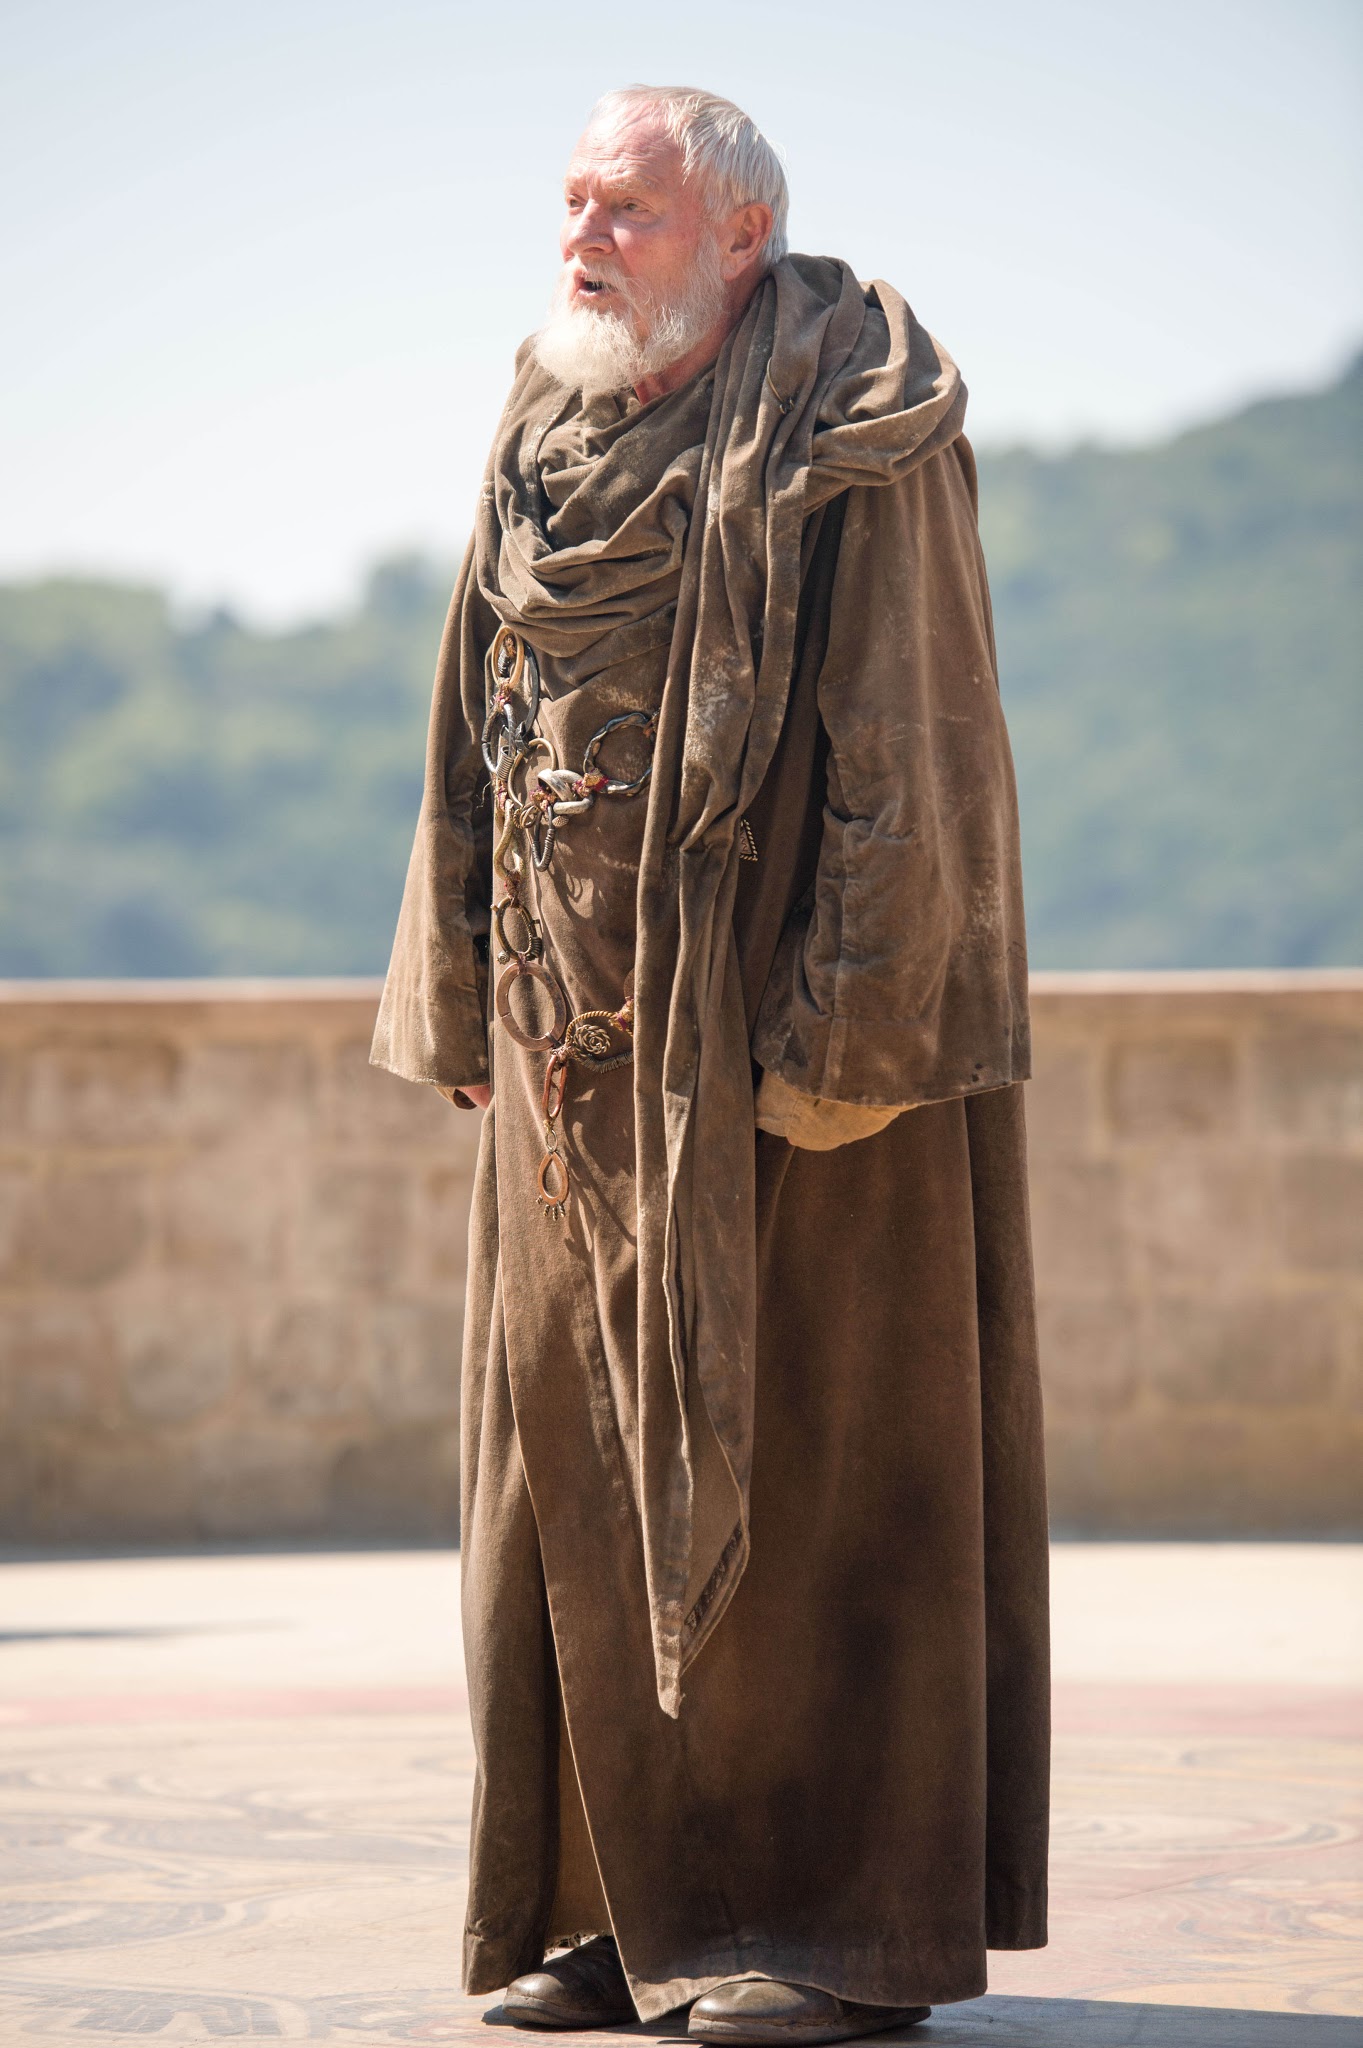 FOTOS Game of Thrones 4x08 "The Mountain and the Viper"